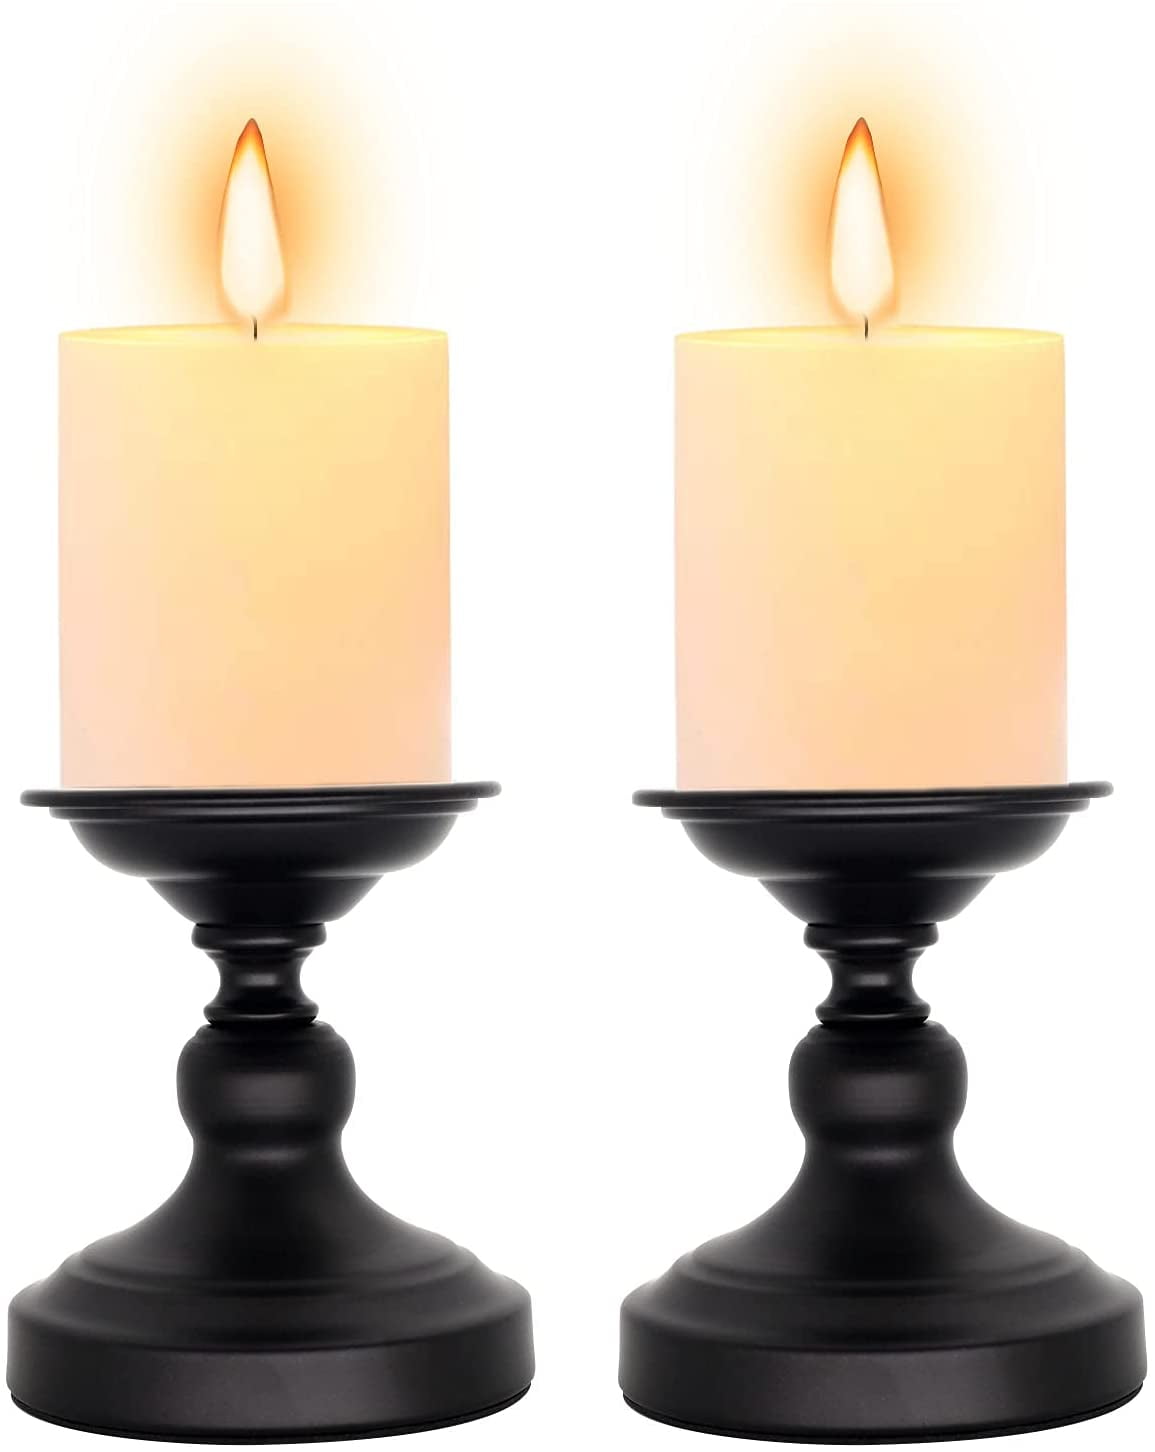 Candlestick Holders Black Metal Candle Holders Decorative Candlestick Holder Set of 12 Metal Tall Candle Stick Long Holders for Pillar Candles Table Centerpieces Wedding Home Candlelight Dinning 